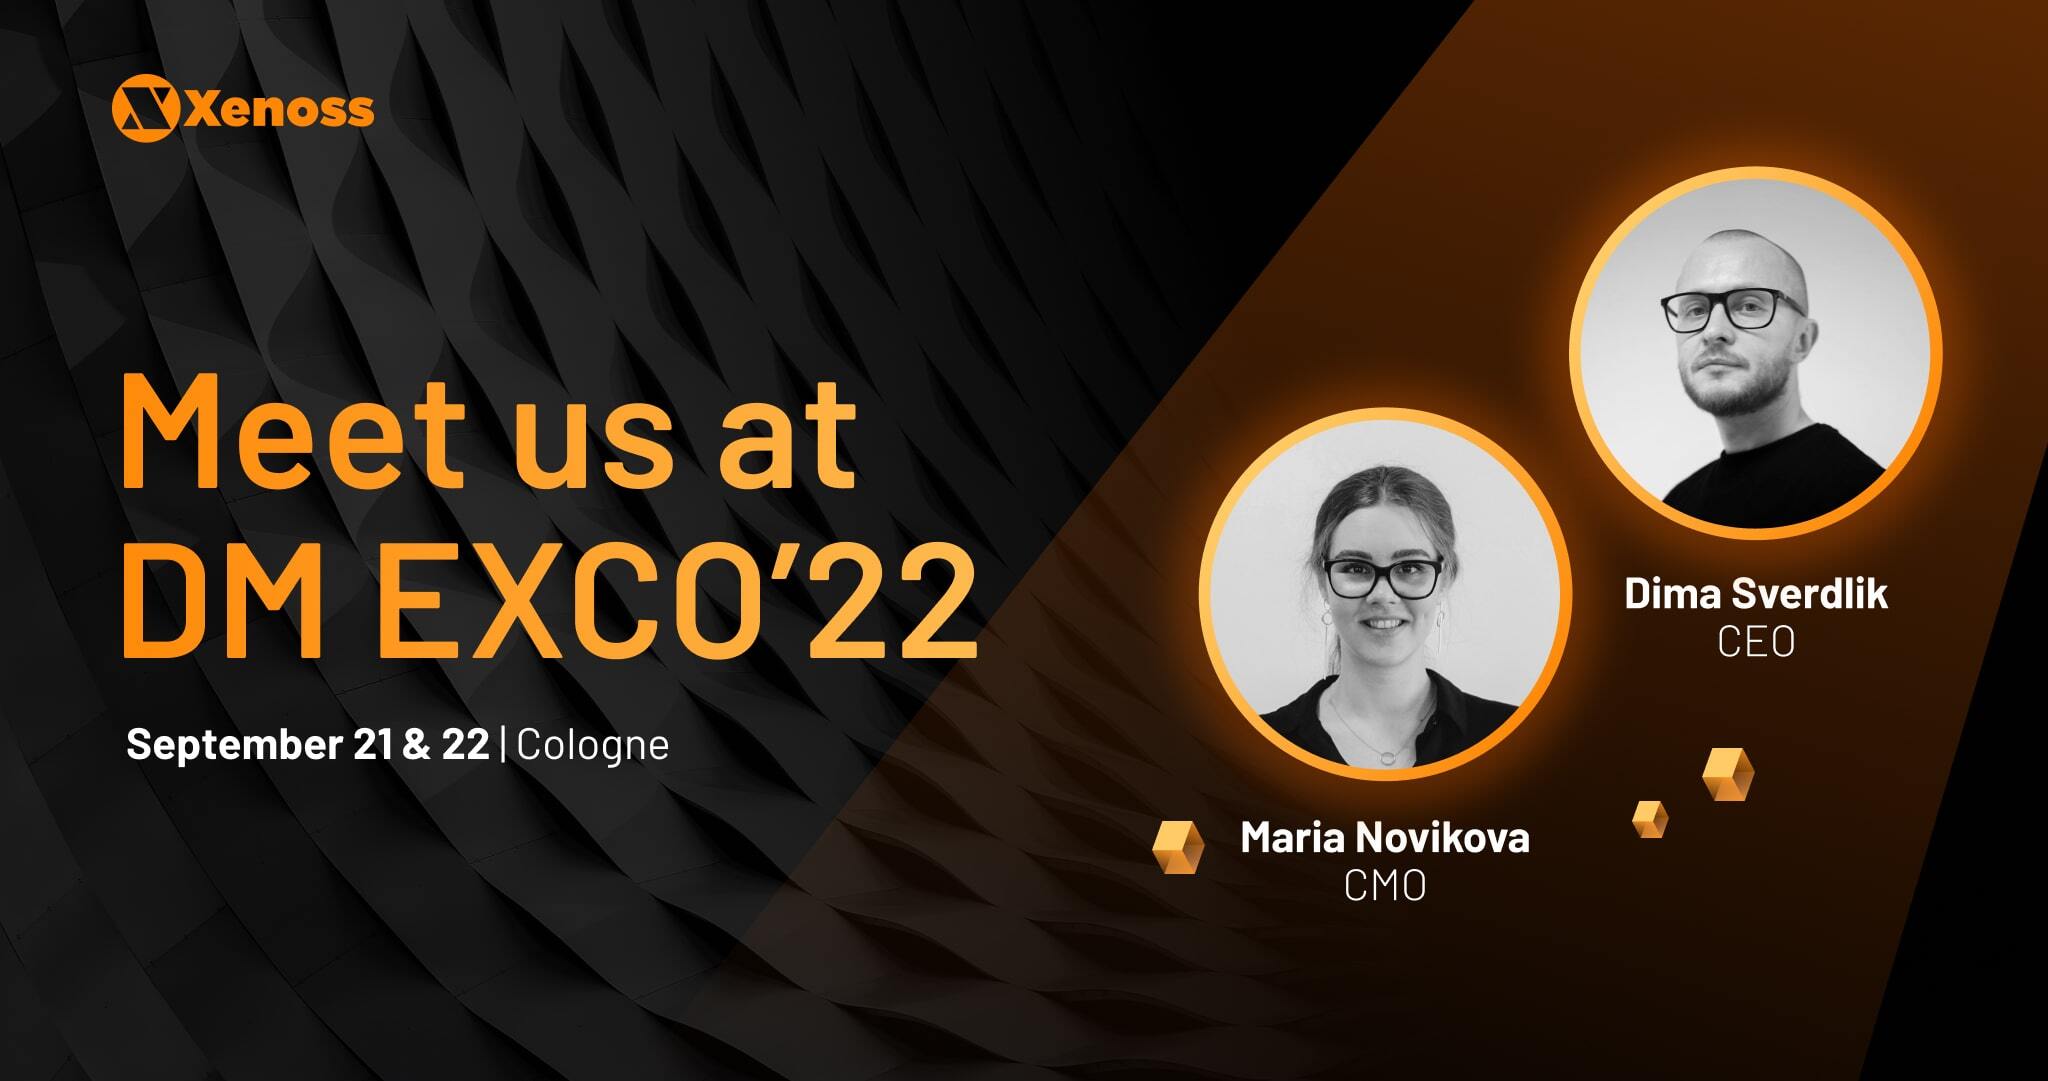 Xenoss Team Is Heading To DMEXCO 2022